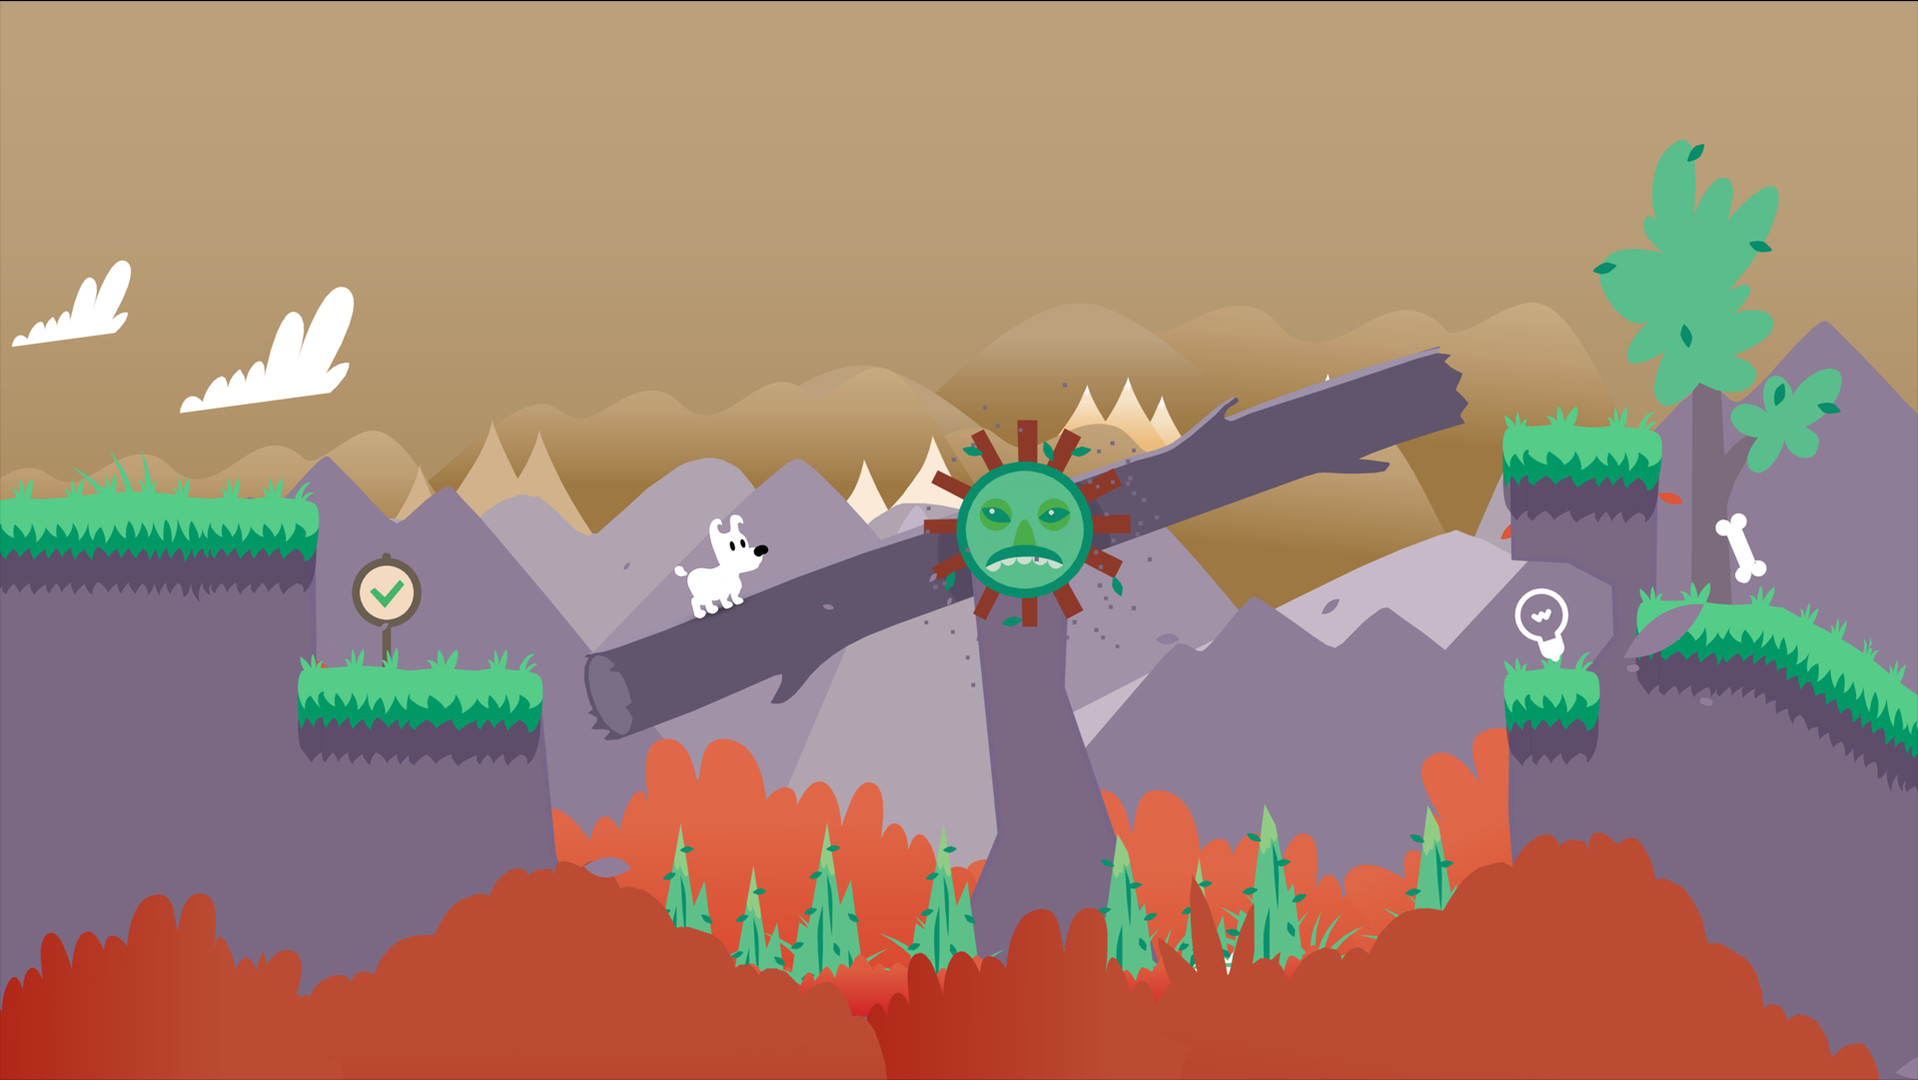 With only six levels, Mimpi dreams is a short experience